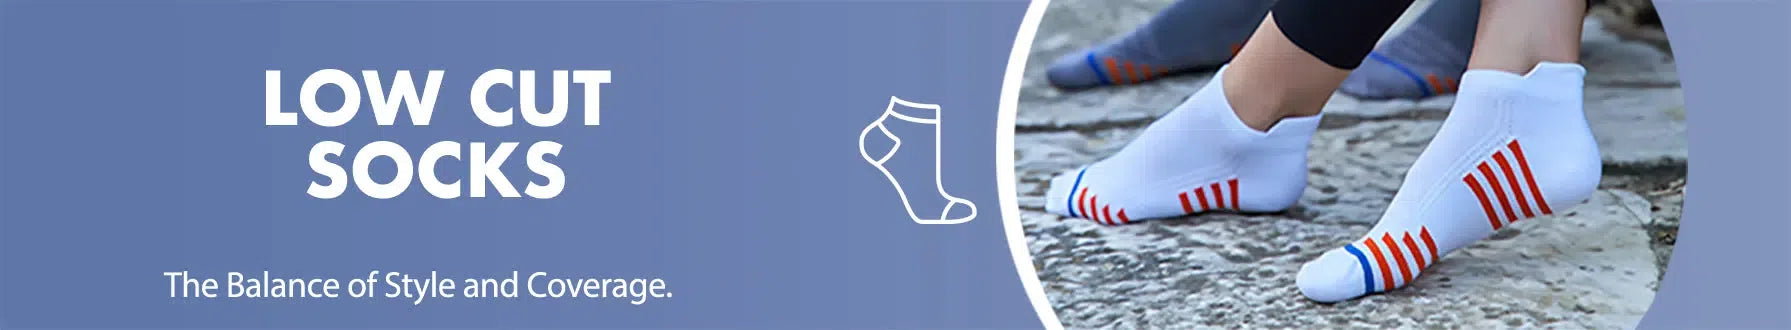 GoWith low cut socks collection banner desktop